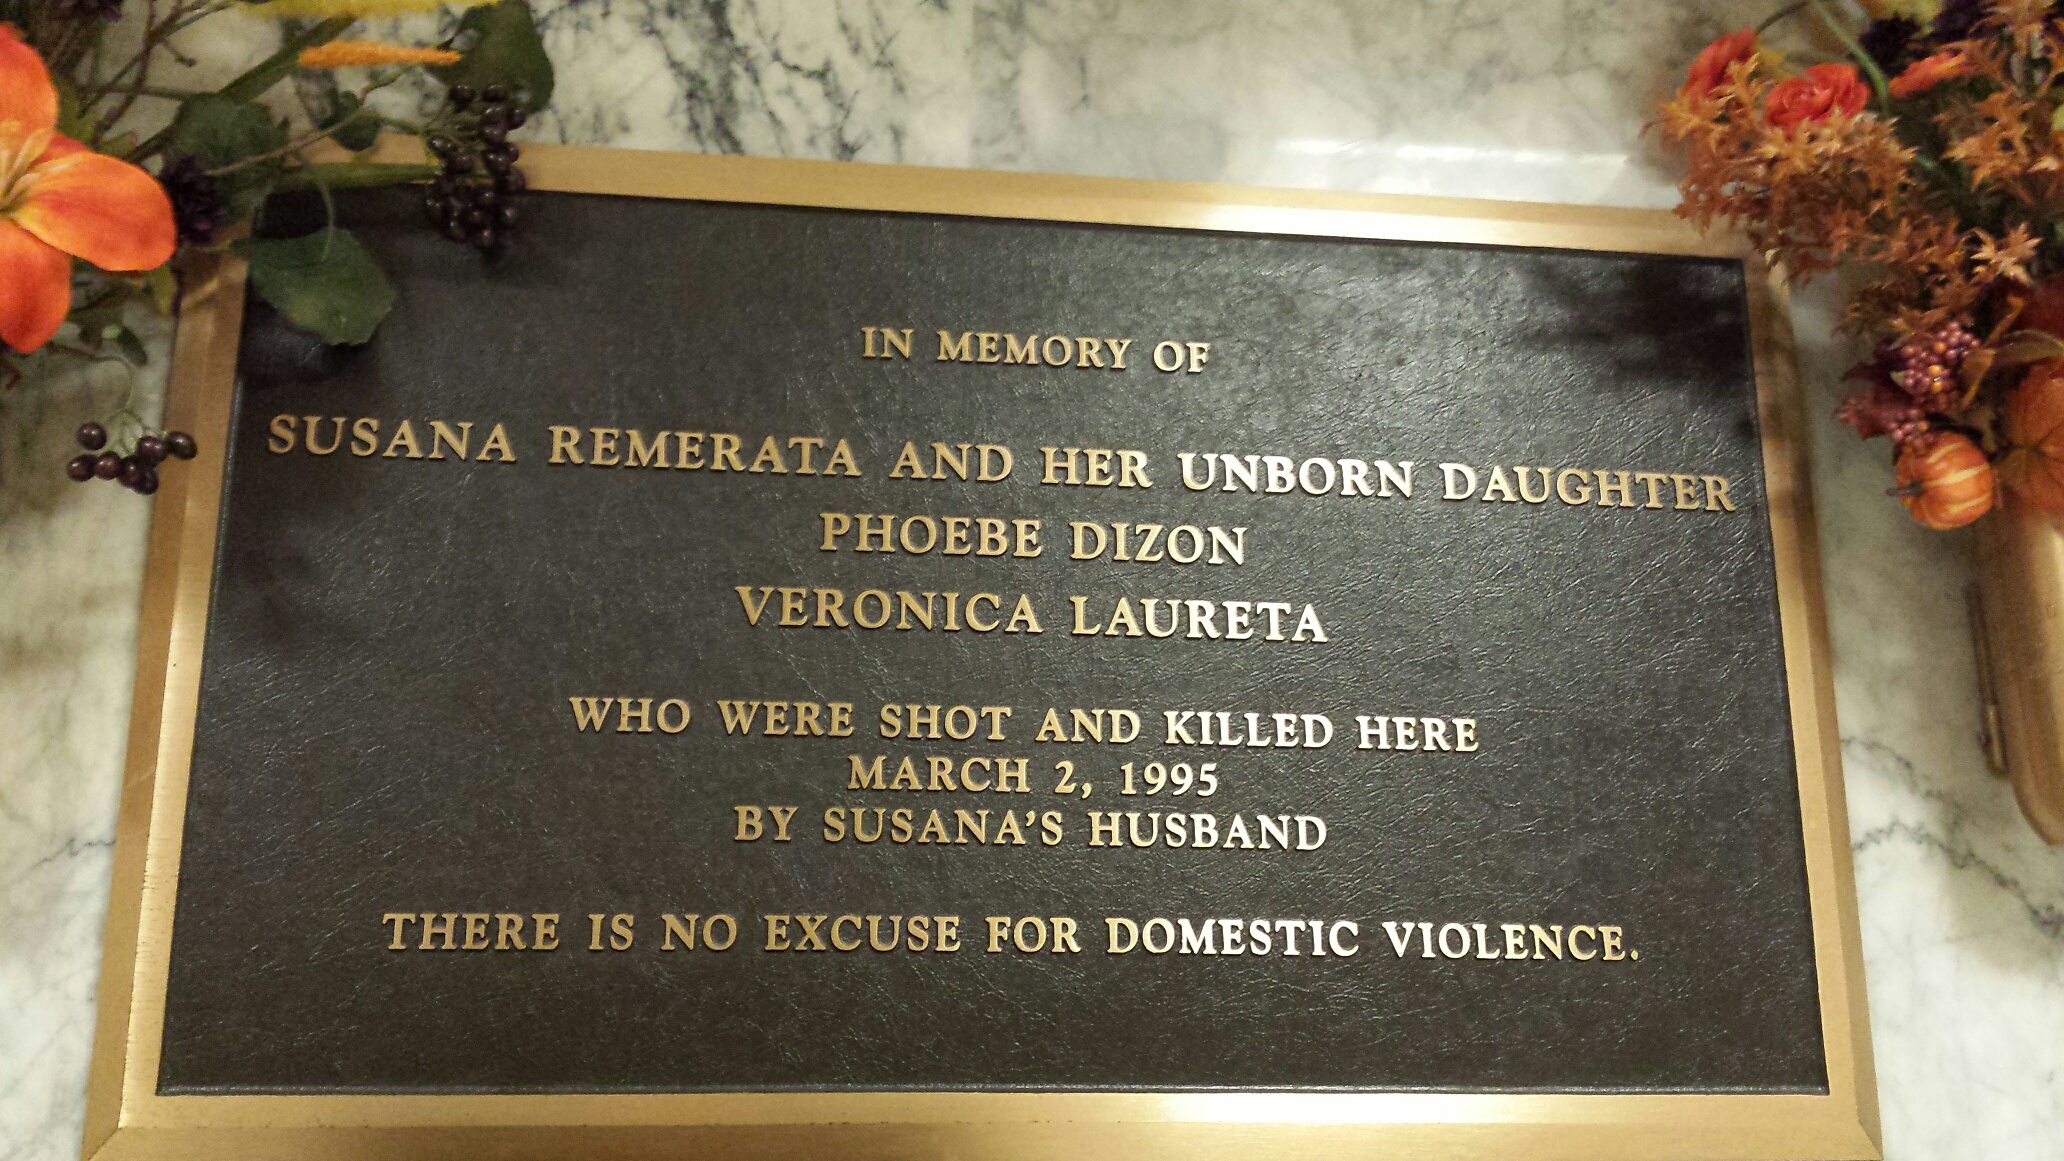 There is no excuse for domestic violence. King County Courthouse: In memory of Susana Remerata and her unborn daughter, Phoebe Dizon, Veronica Laureta - who were shot and killed here, March 2, 1995, by Susana's husband. Seattle, Washington, USA